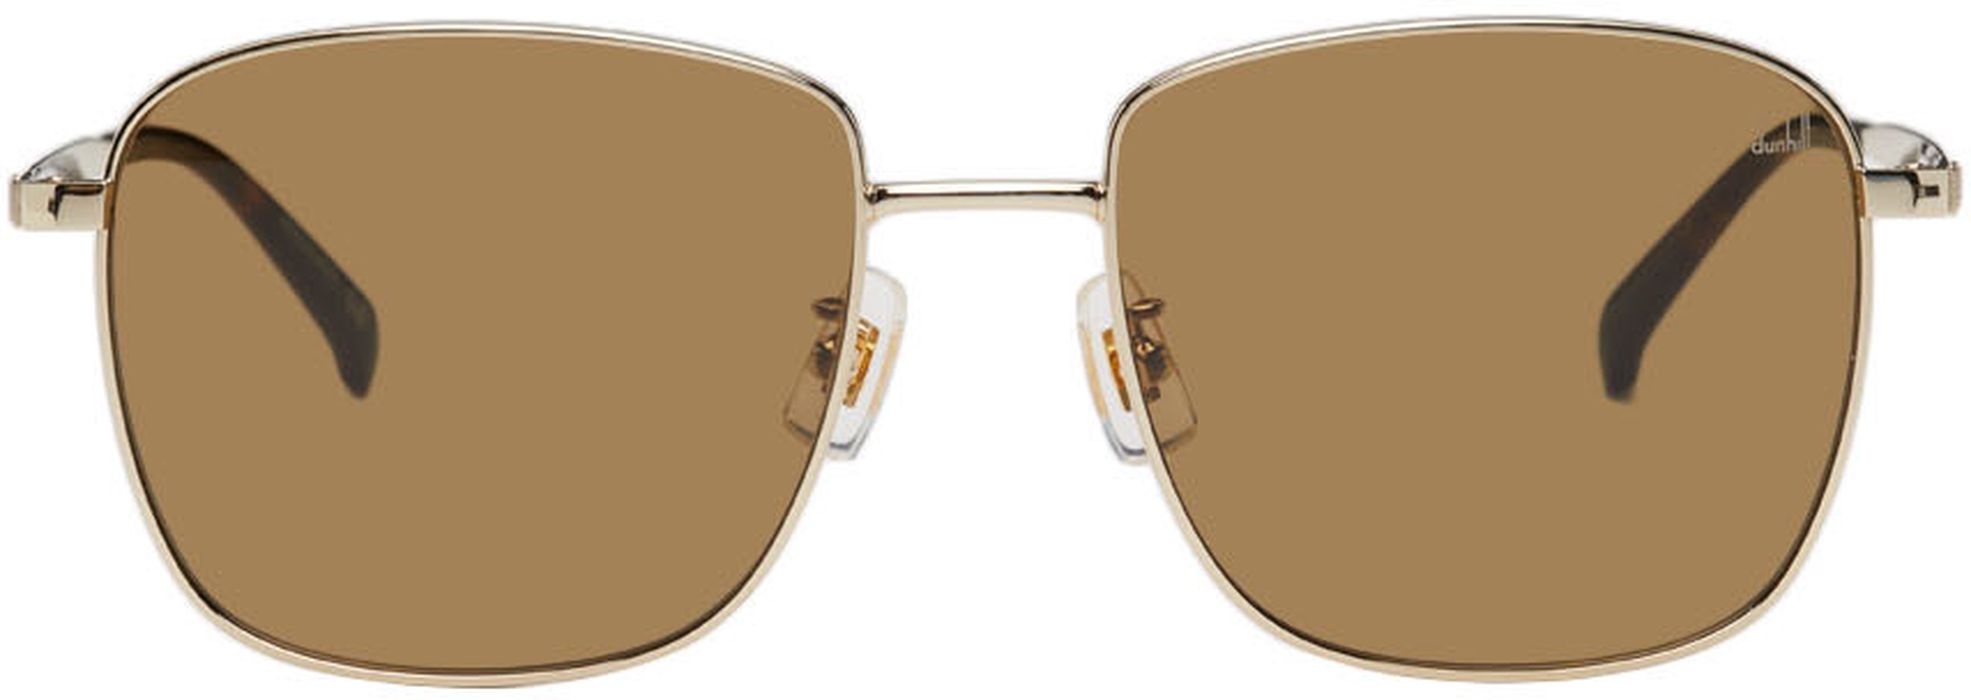 Dunhill Gold Square-Framed Sunglasses